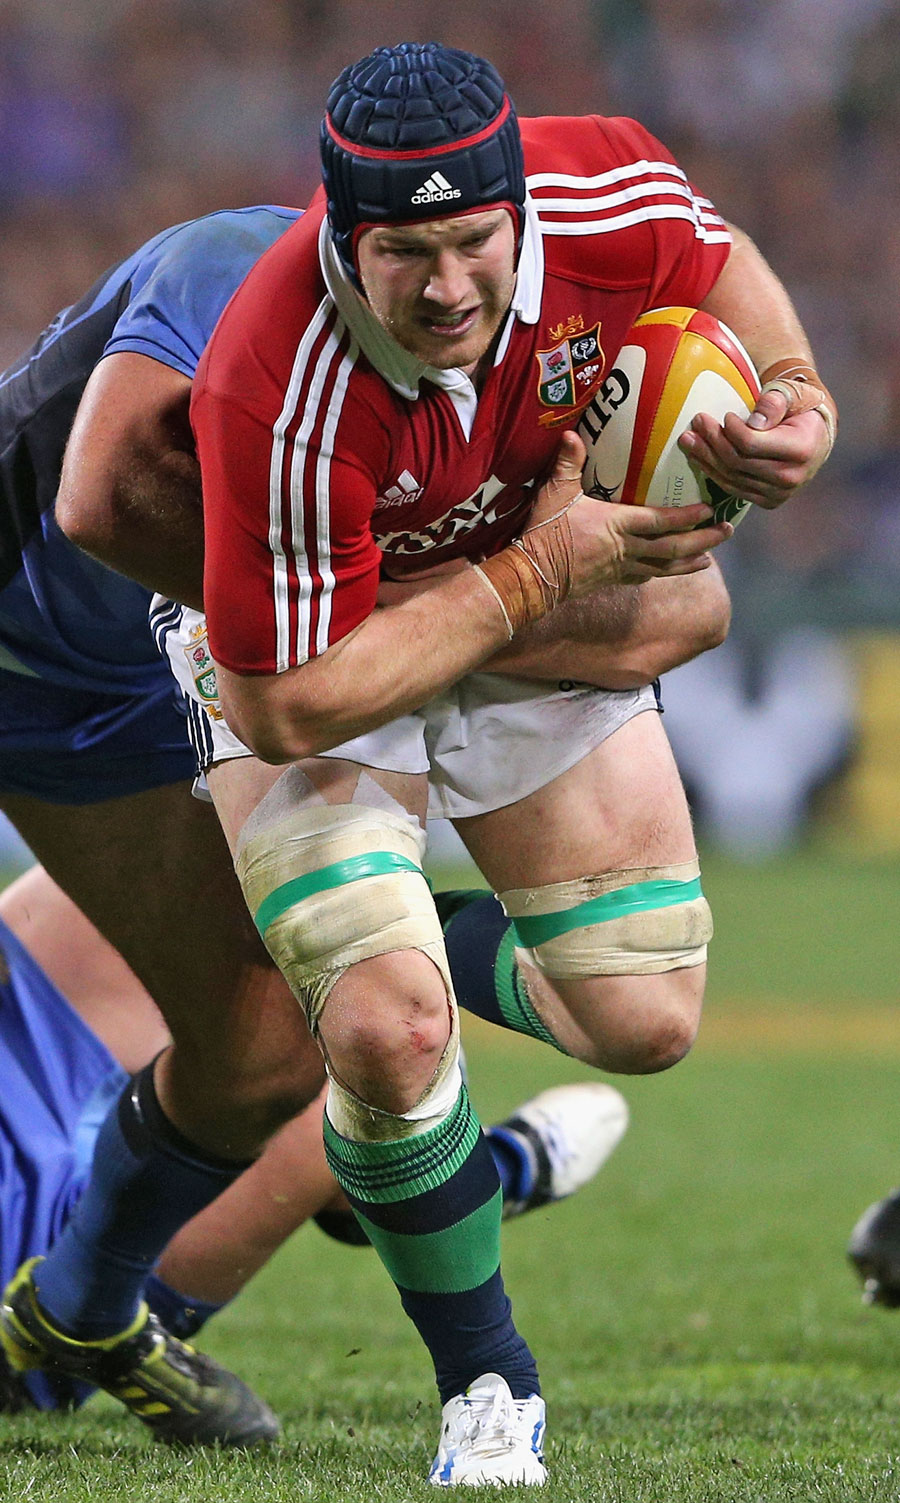 Lions flanker Sean O'Brien on the charge